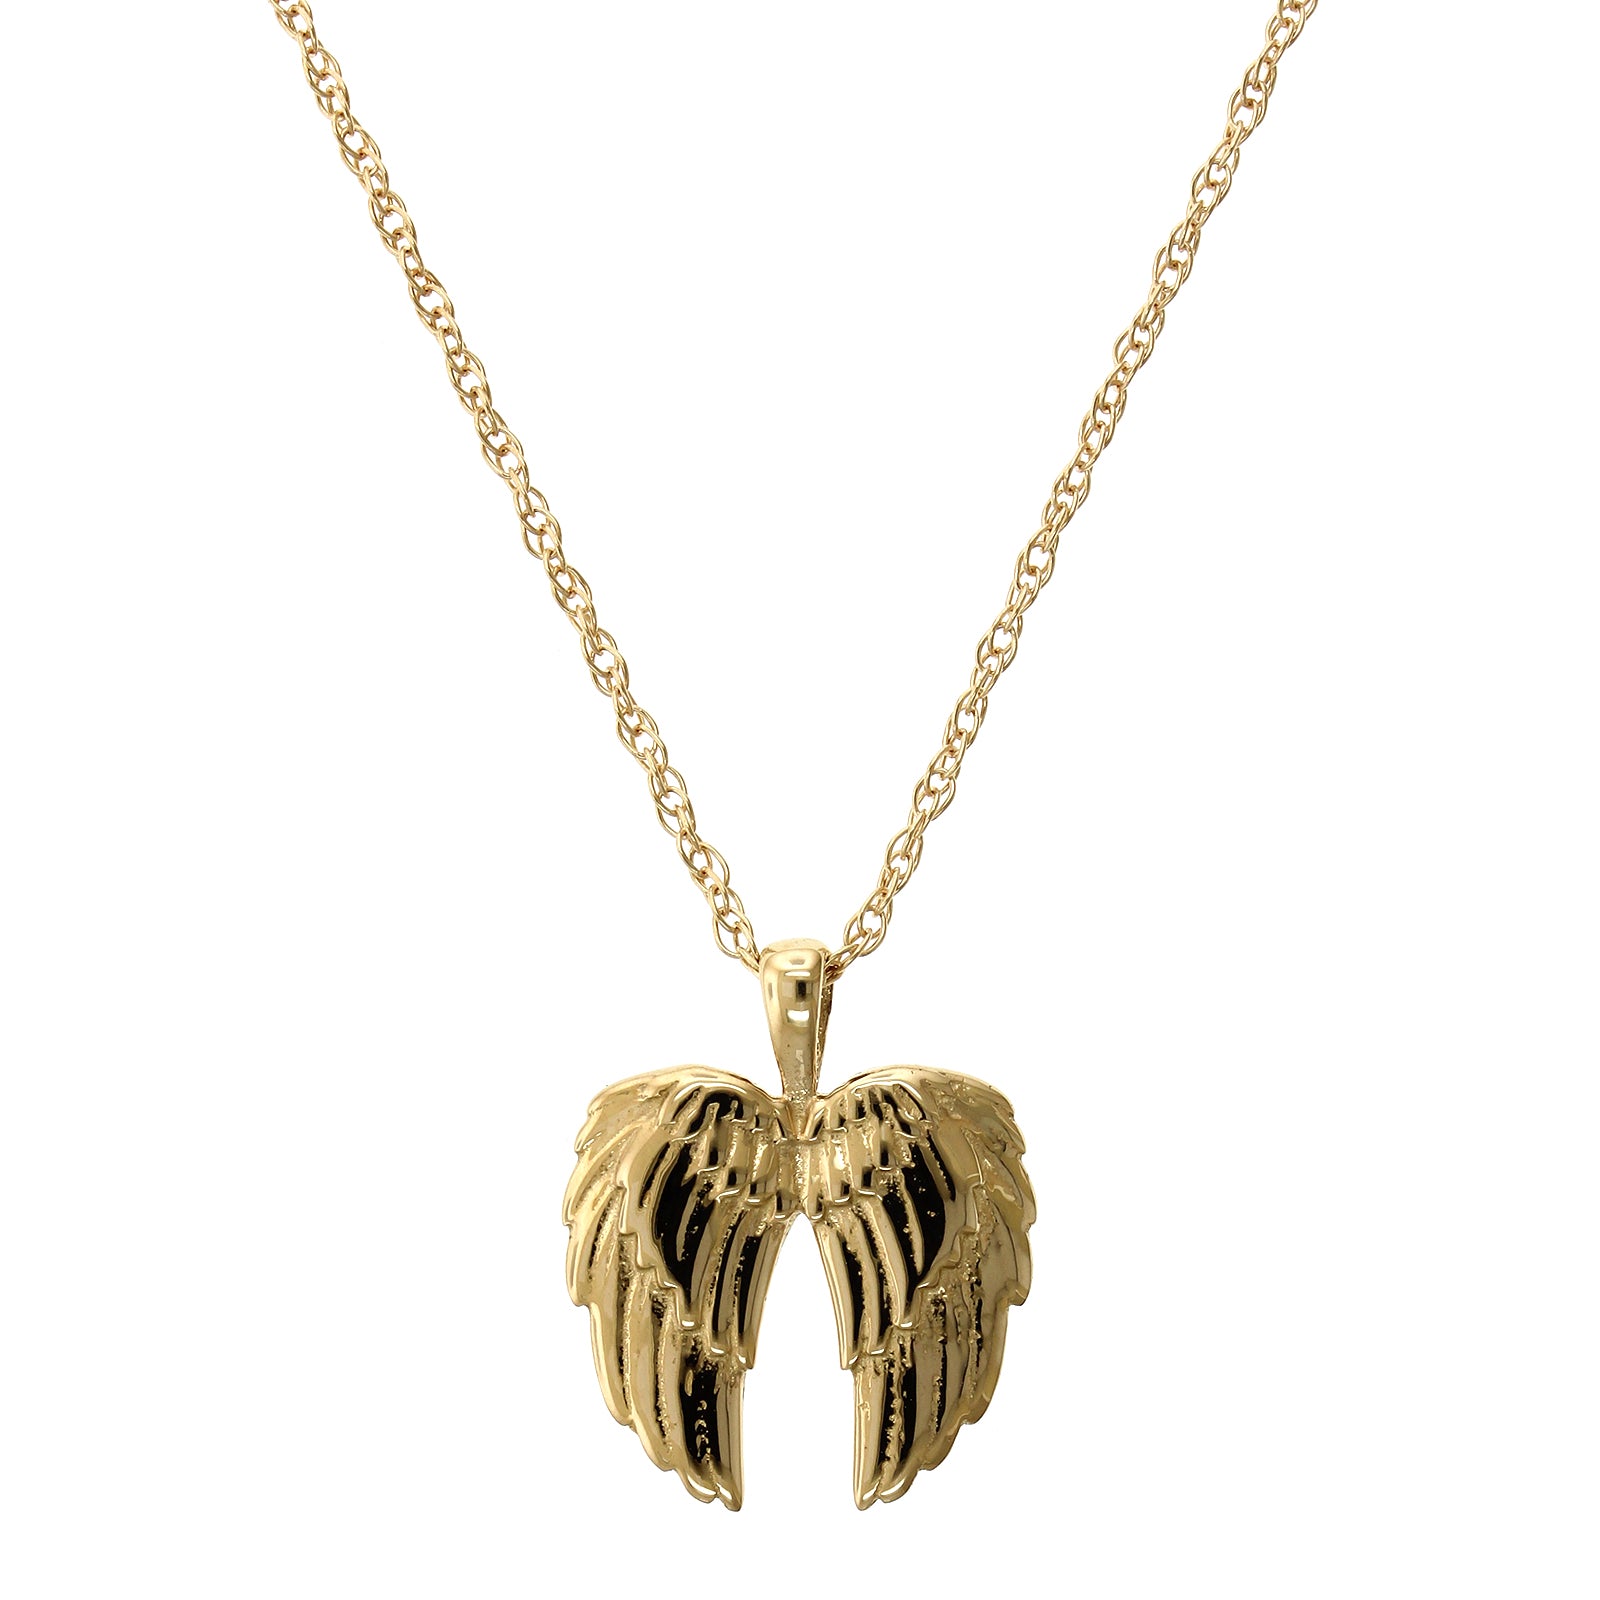 14K Yellow Gold Double Wing Pendant